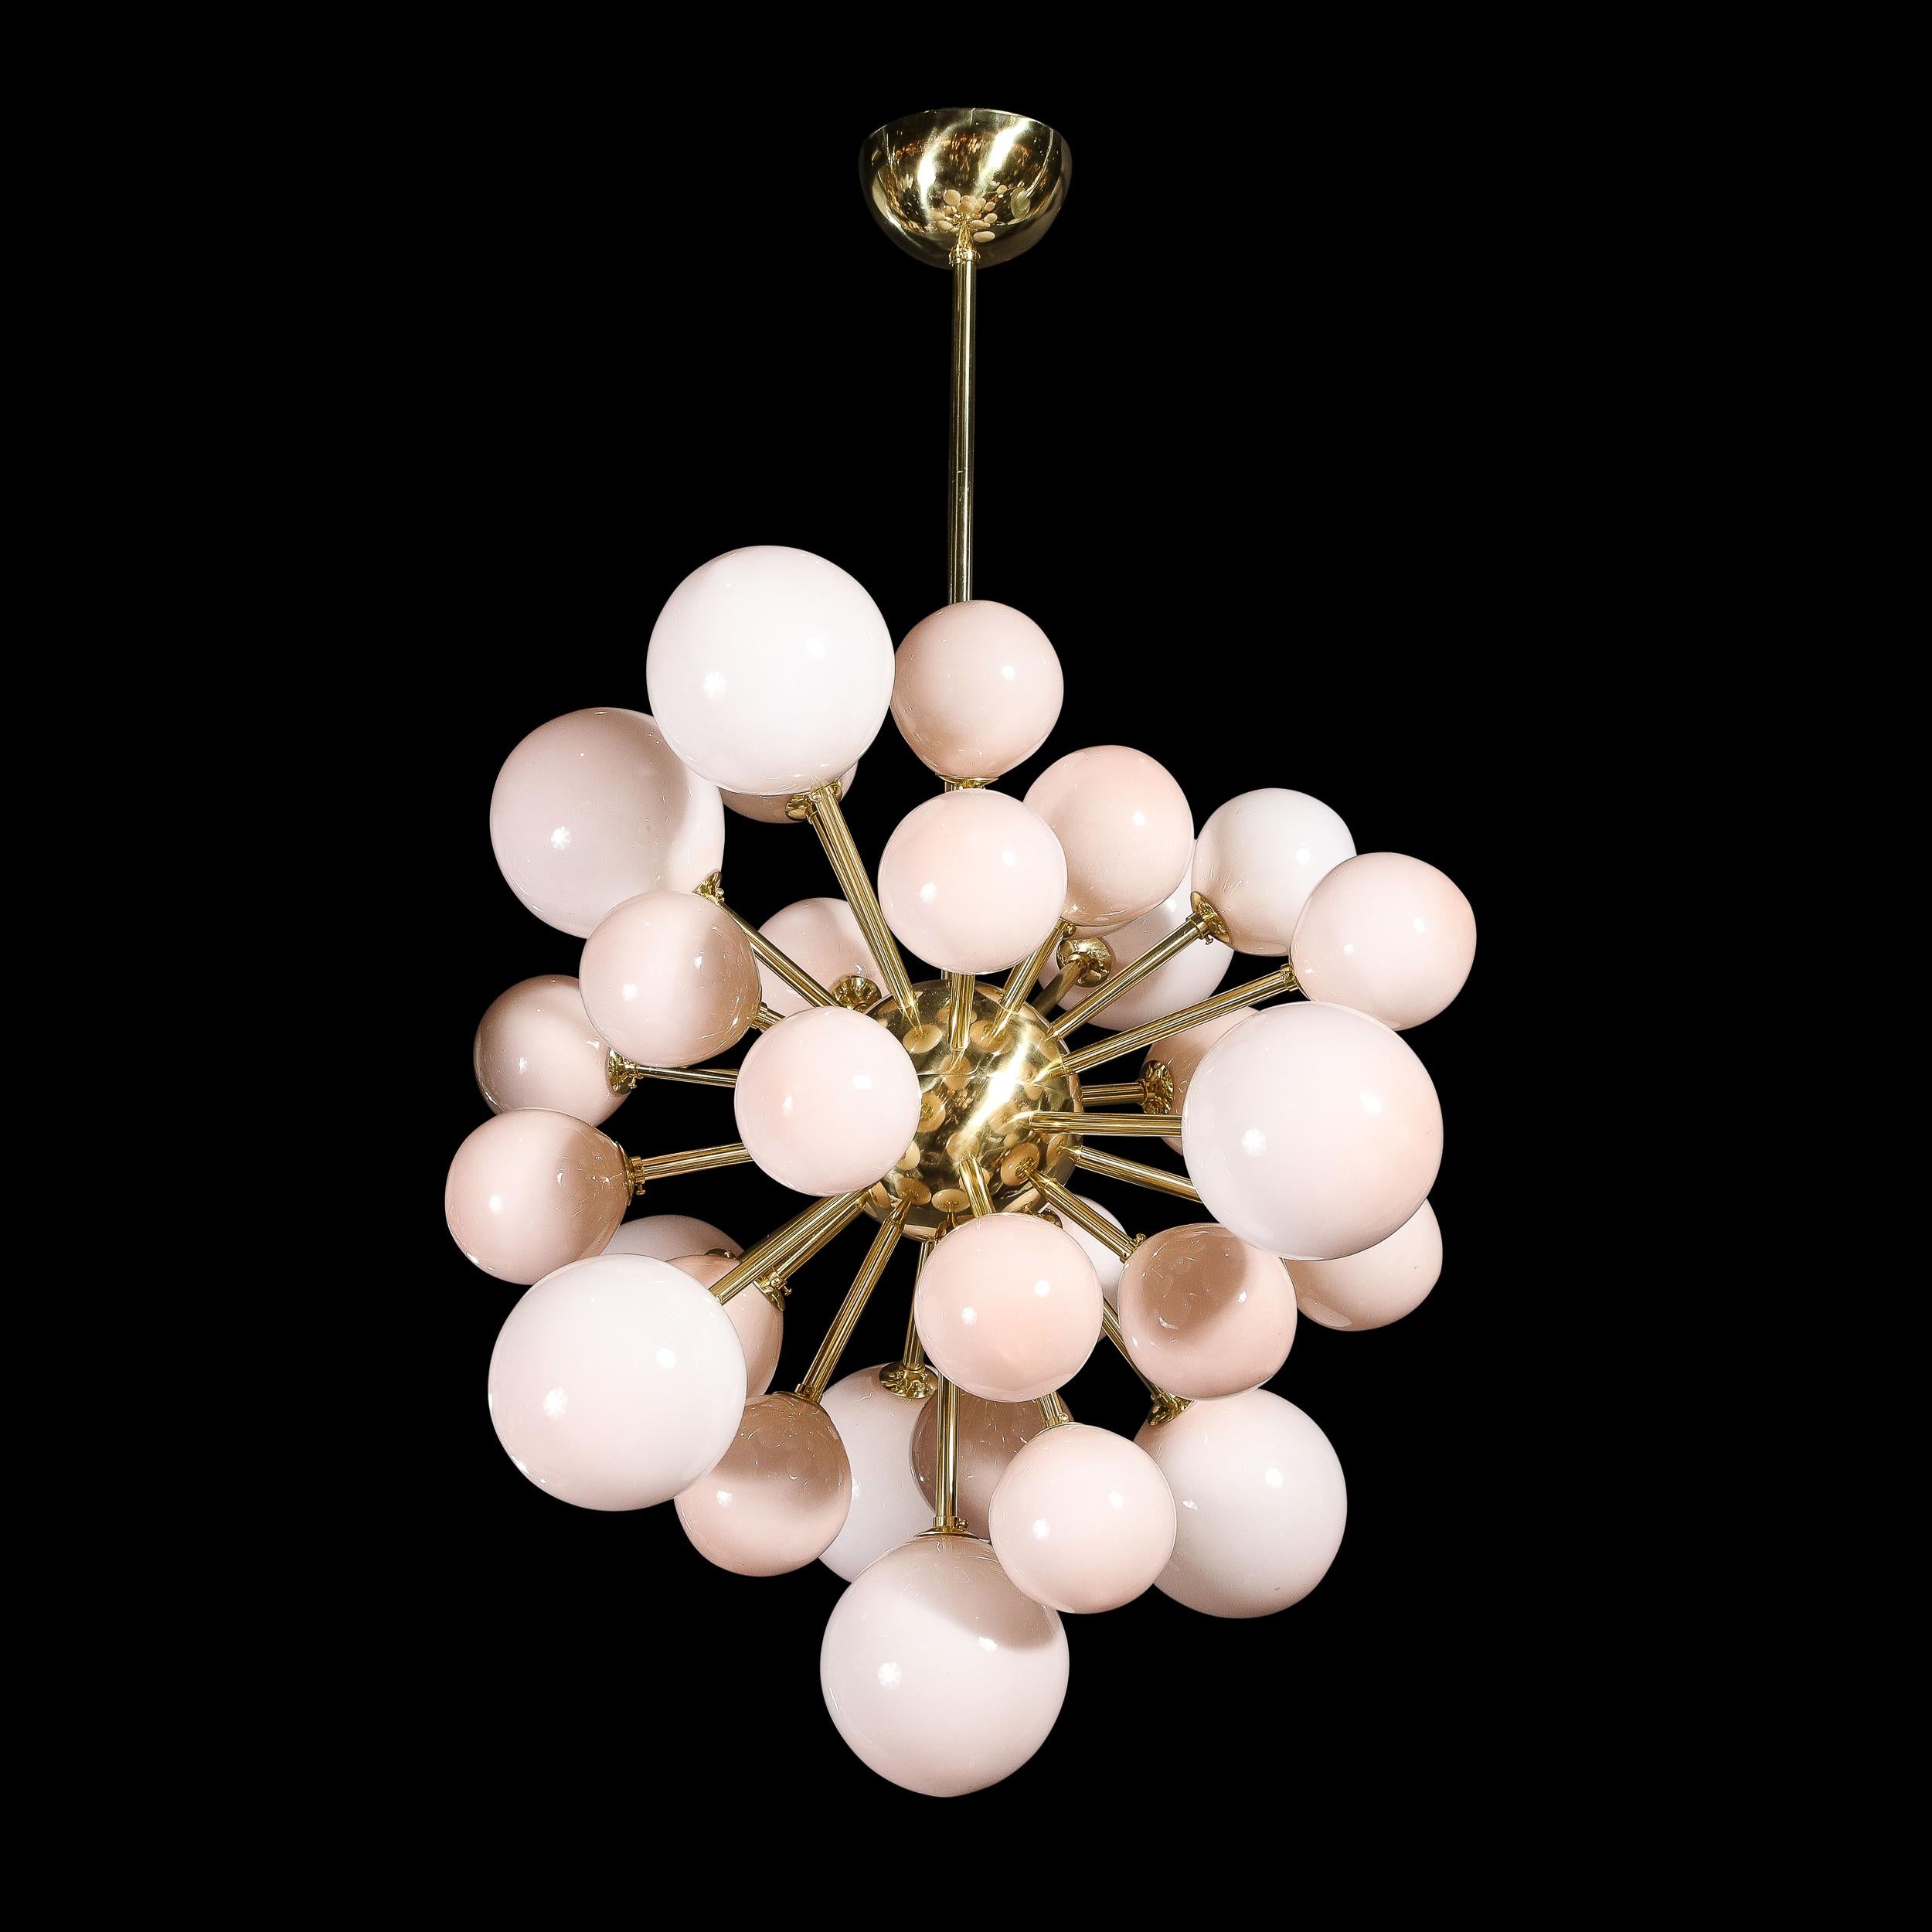 This captivating and graphic modernist sputnik chandelier was handblown in Murano, Italy- the island off the coast of Venice renowned for centuries for its superlative glass production. It features an abundance of orbs in handblown Murano glass of a